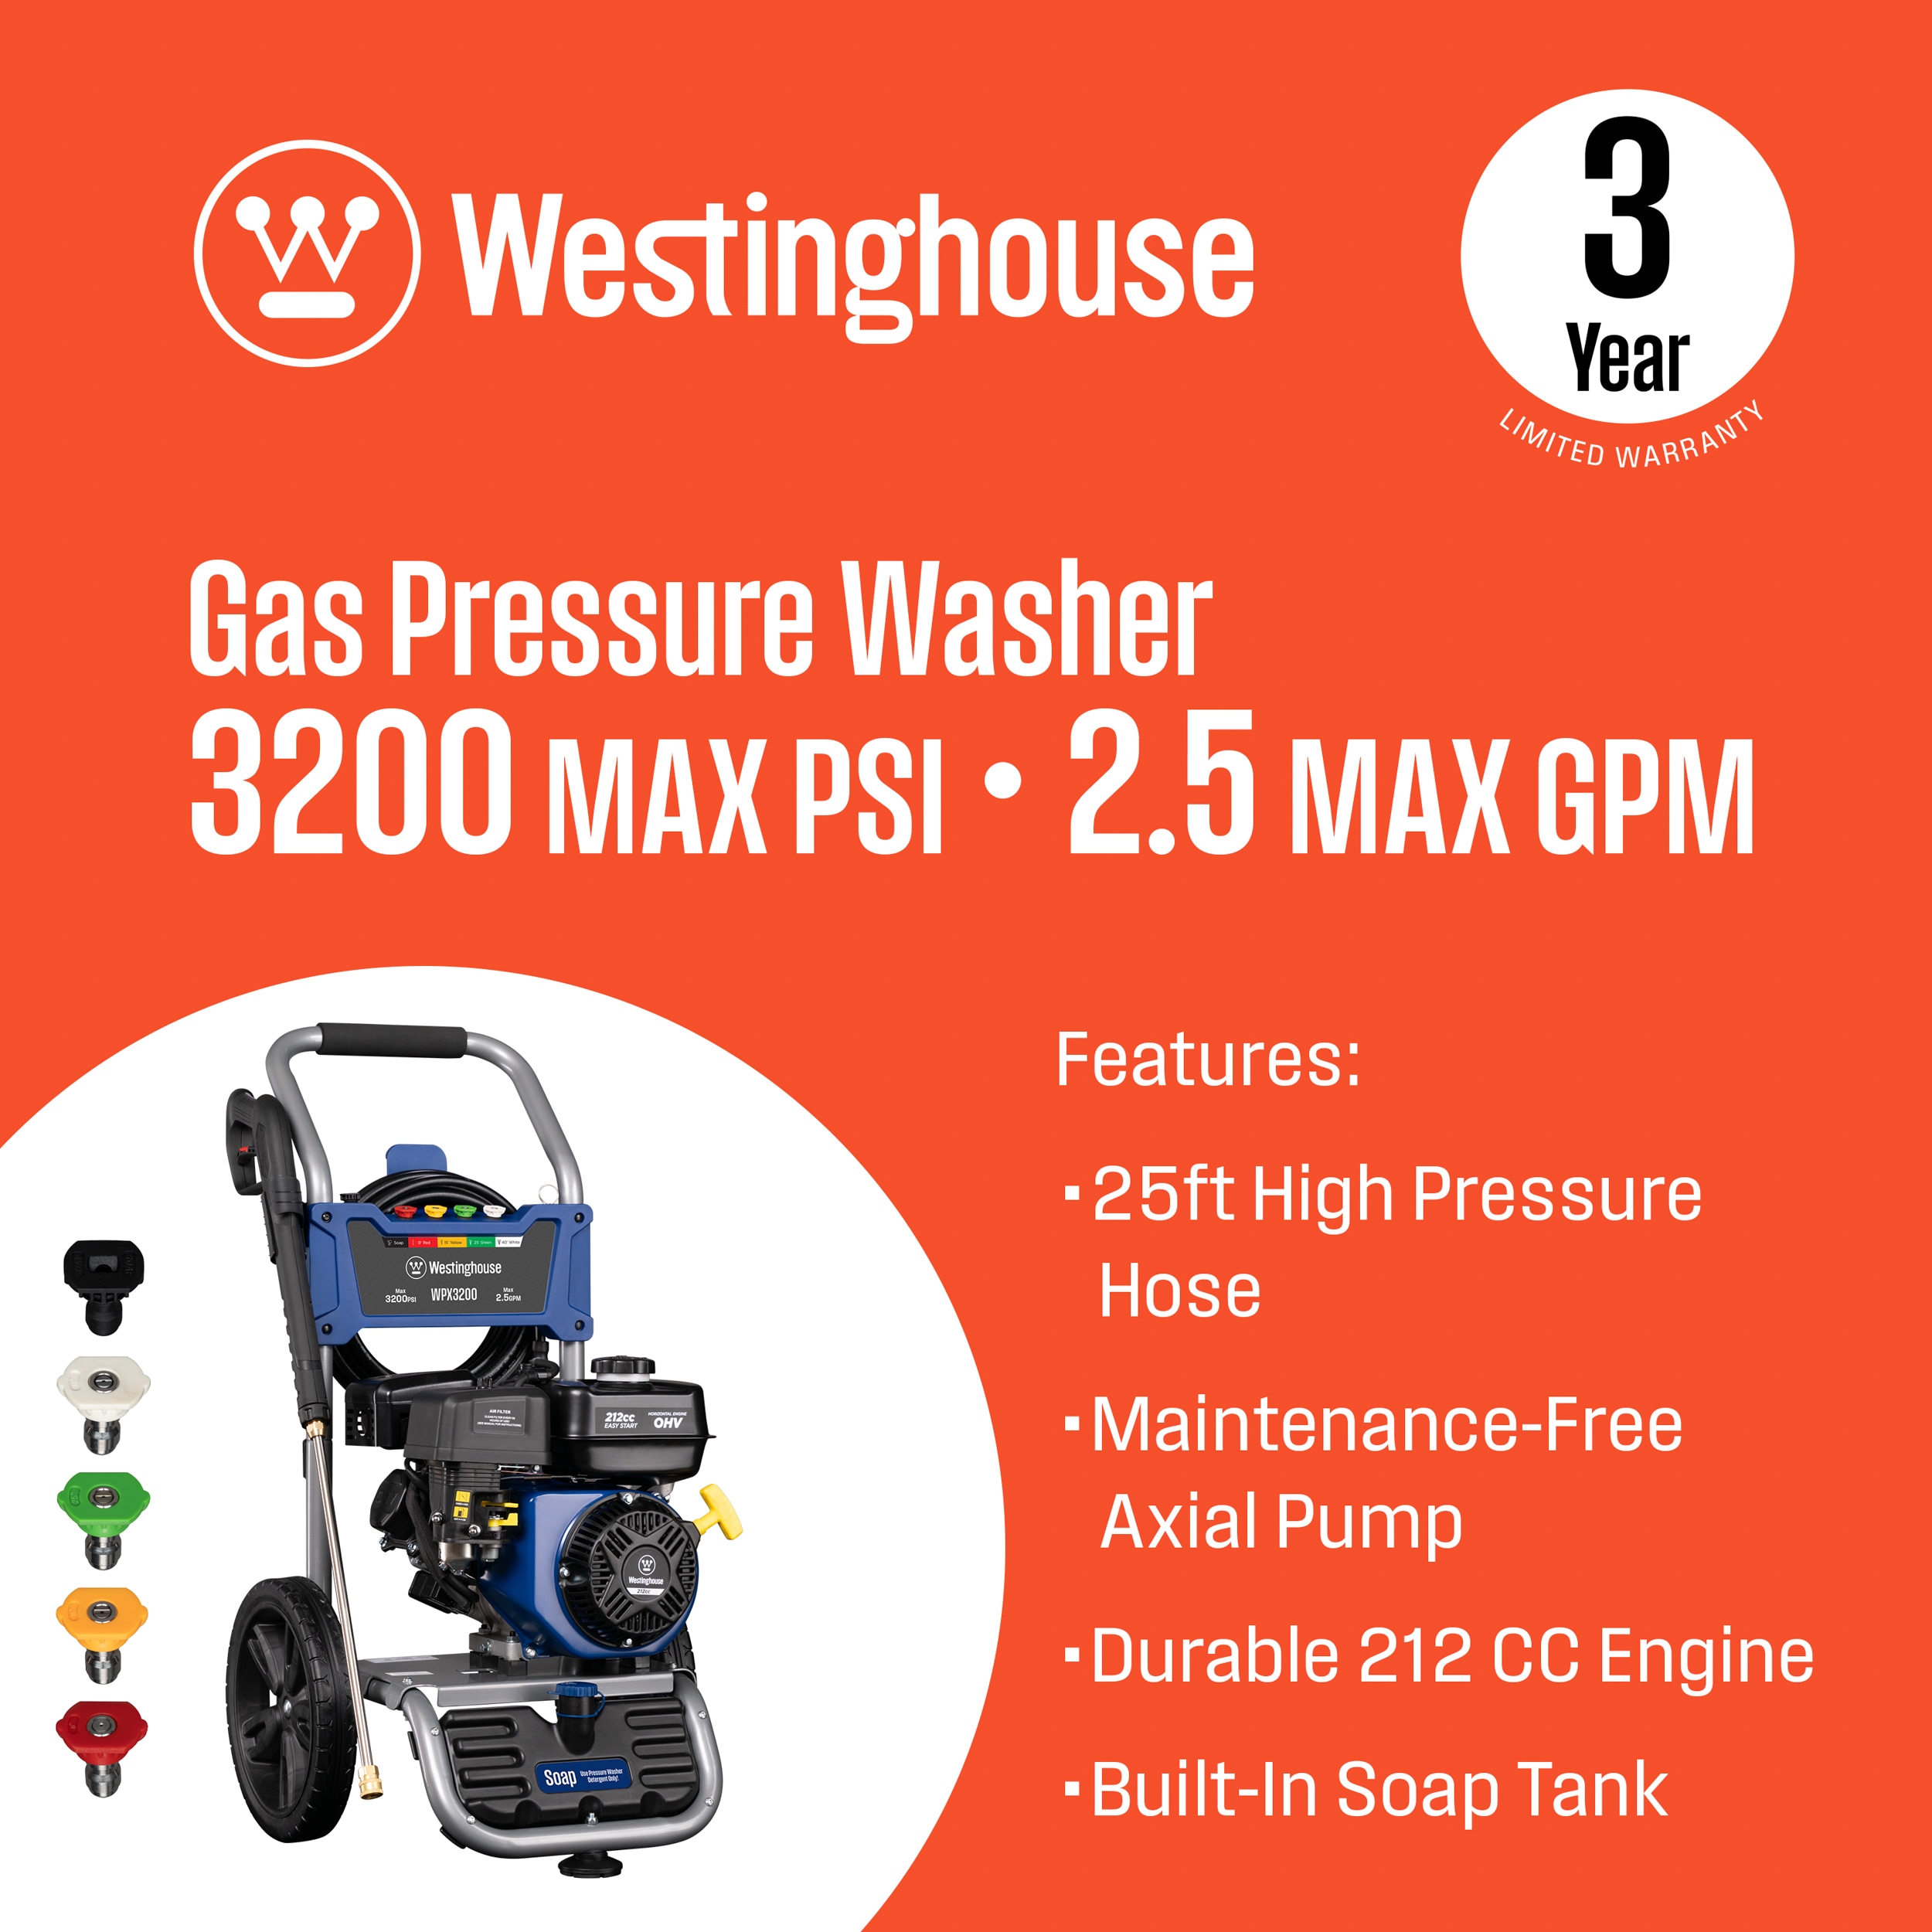 Westinghouse Outdoor Tools & Equipment at